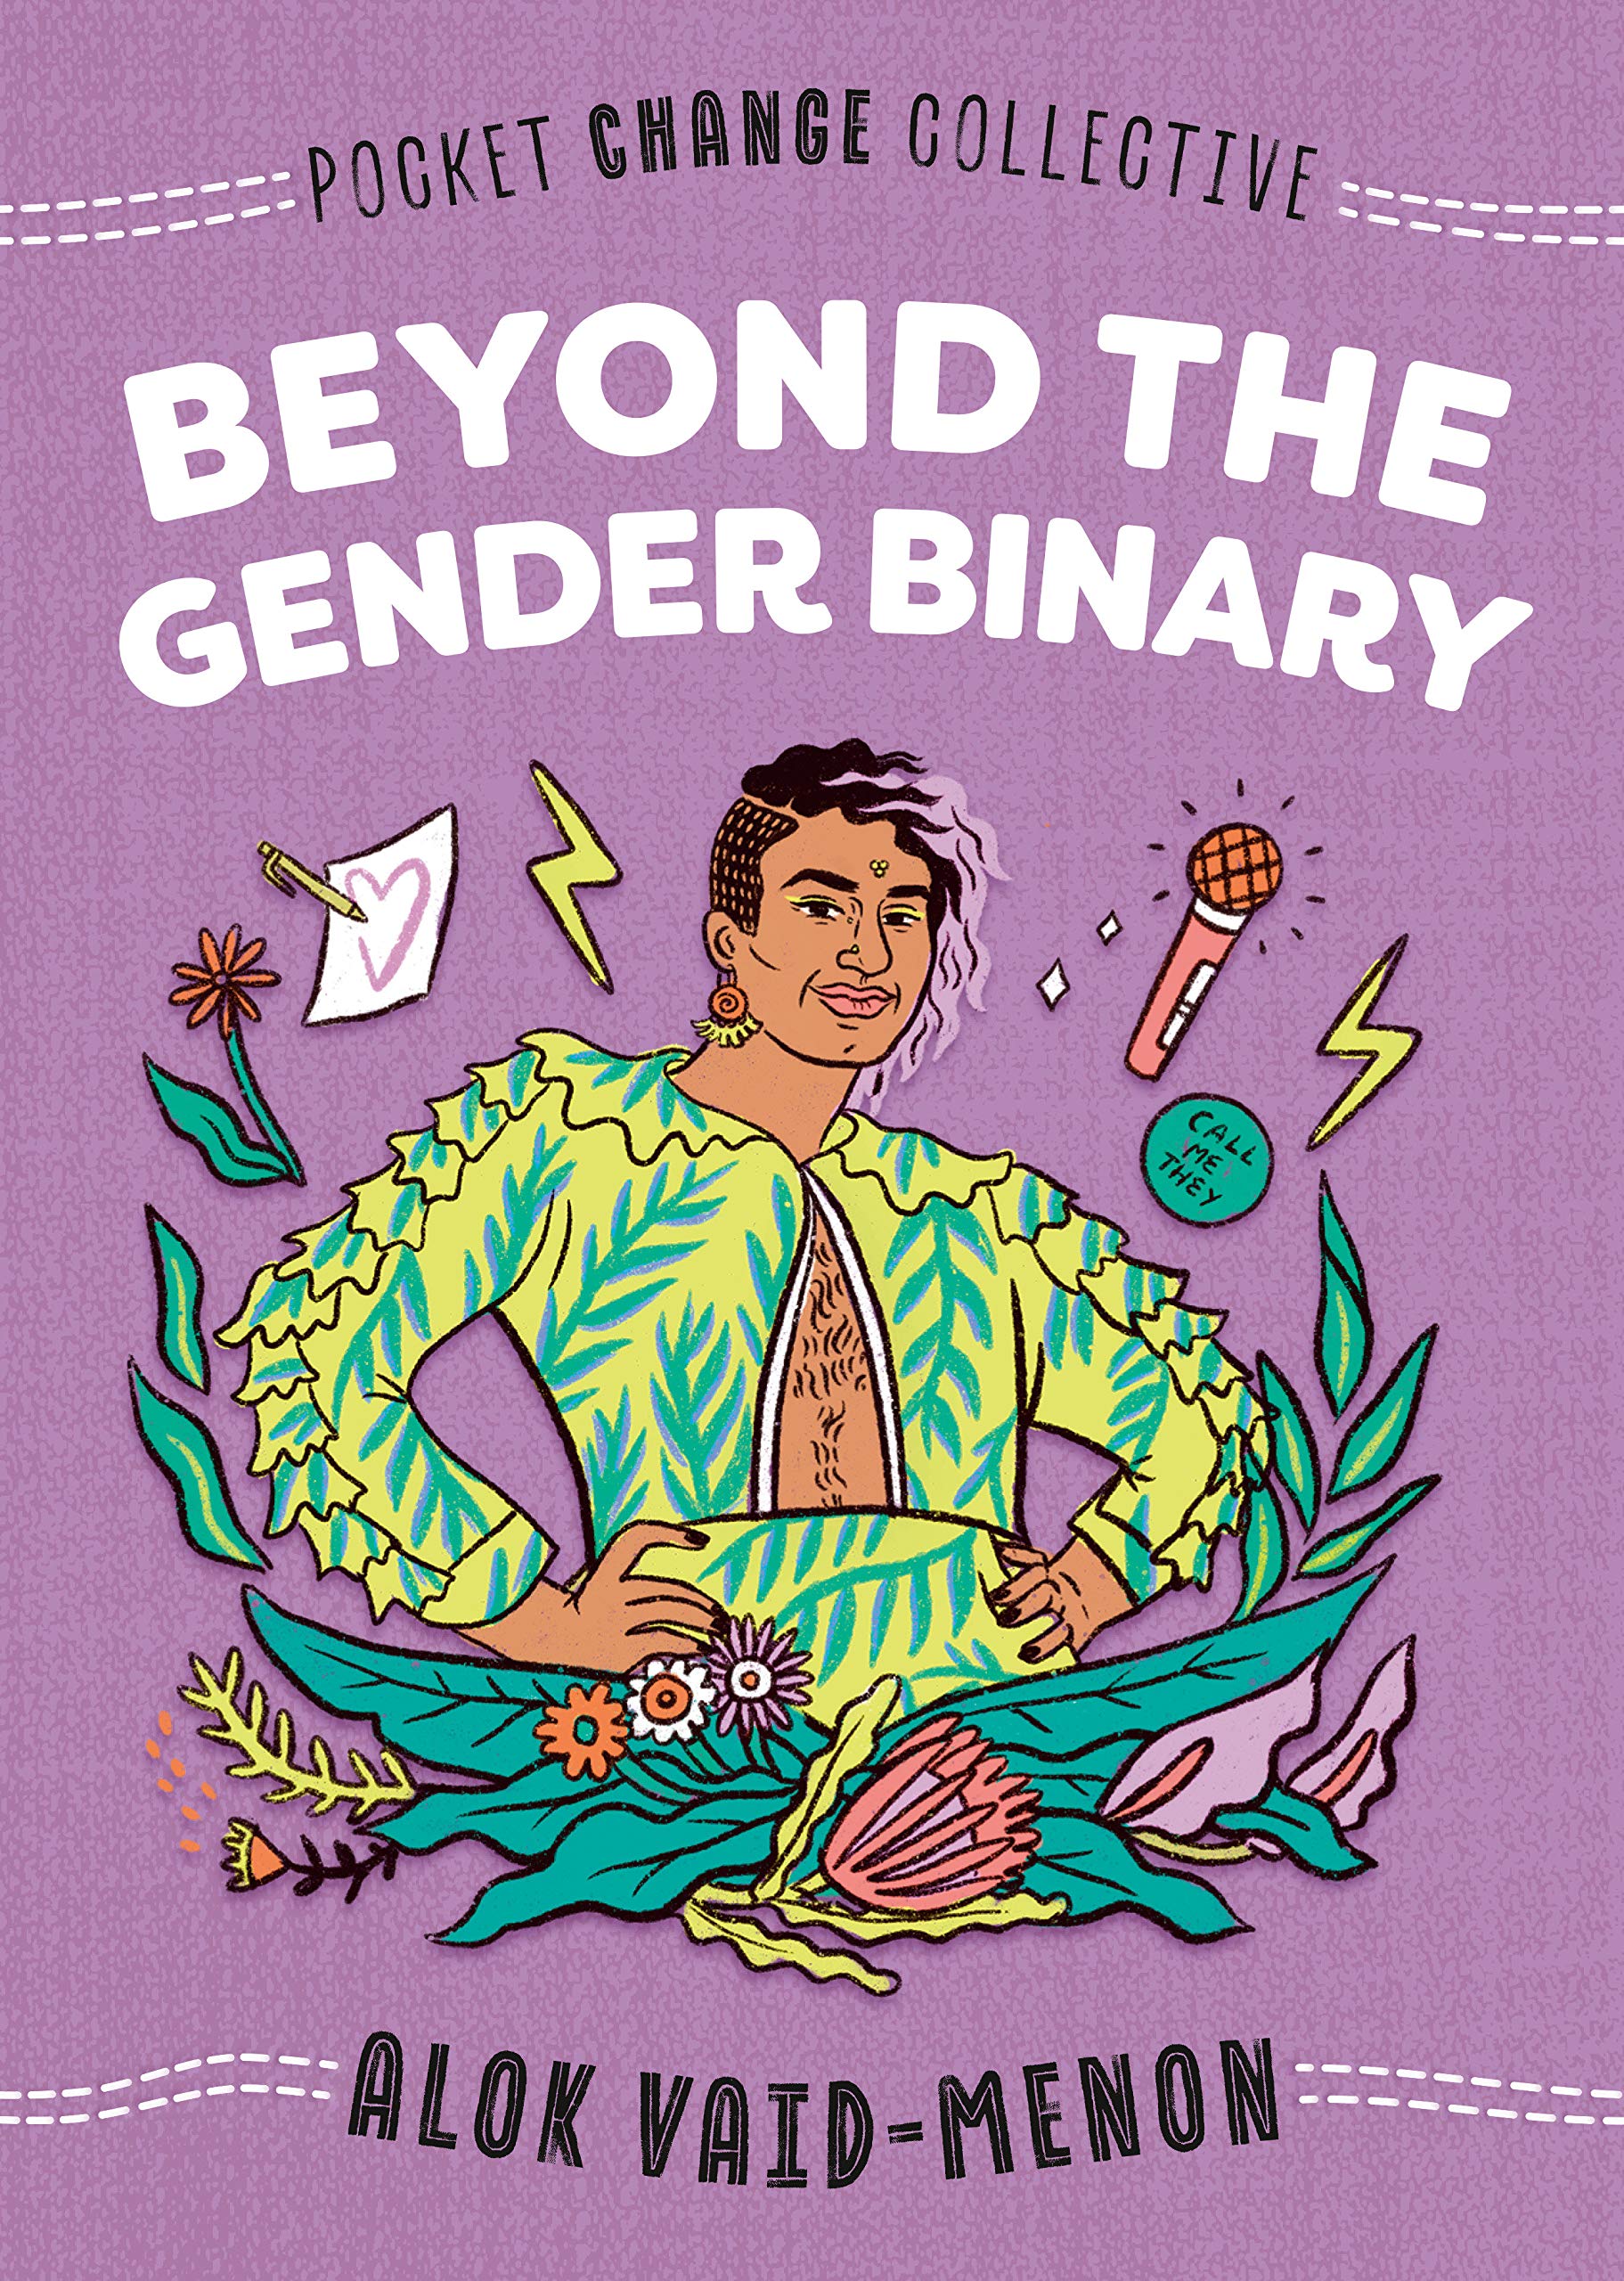 Pocket Change Collective: Beyond the Gender Binary